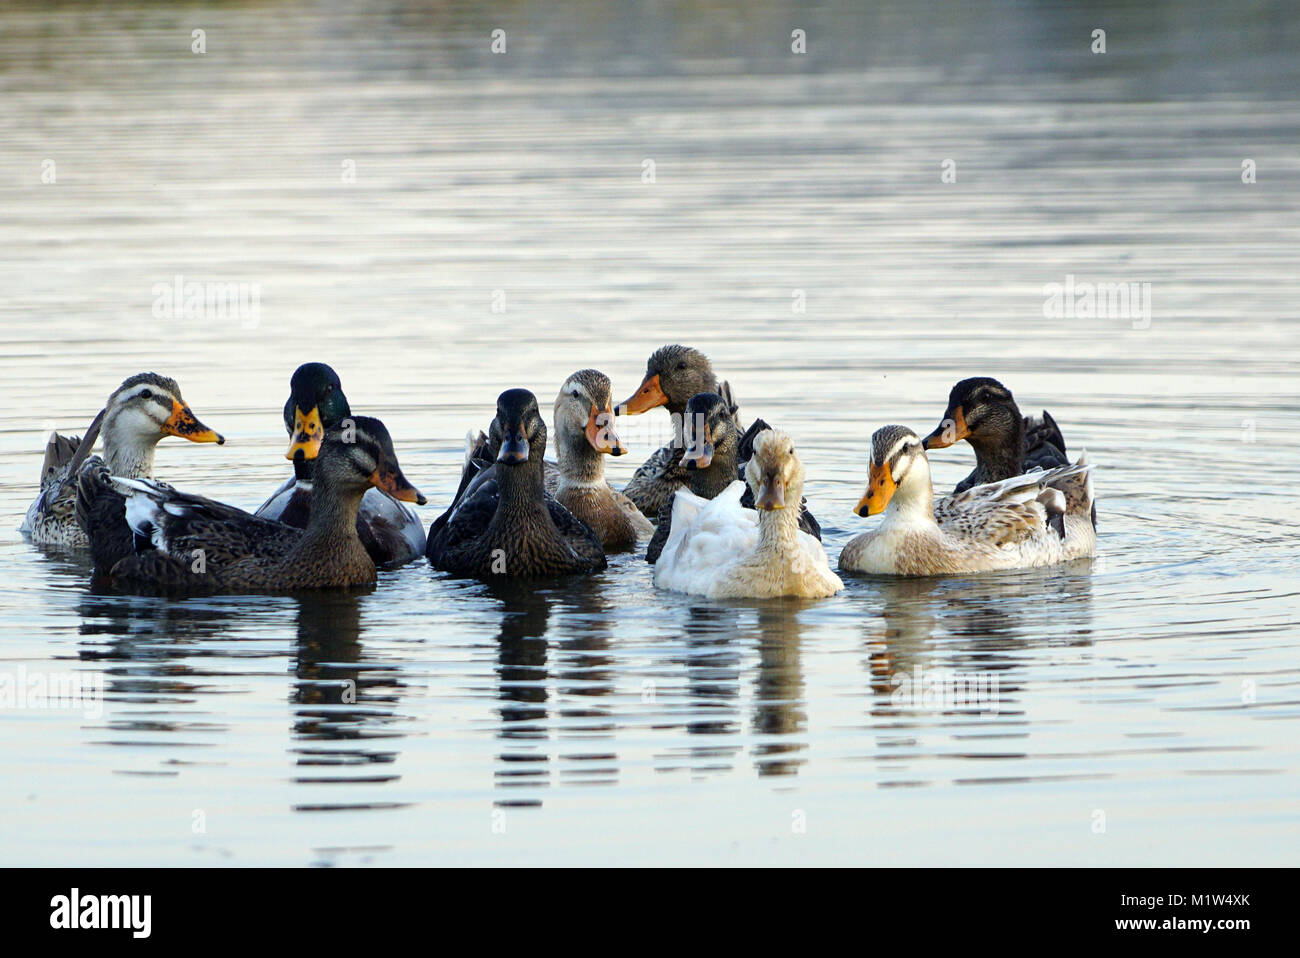 A group of Indian Runner Ducks swimming in the Lake Stock Photo